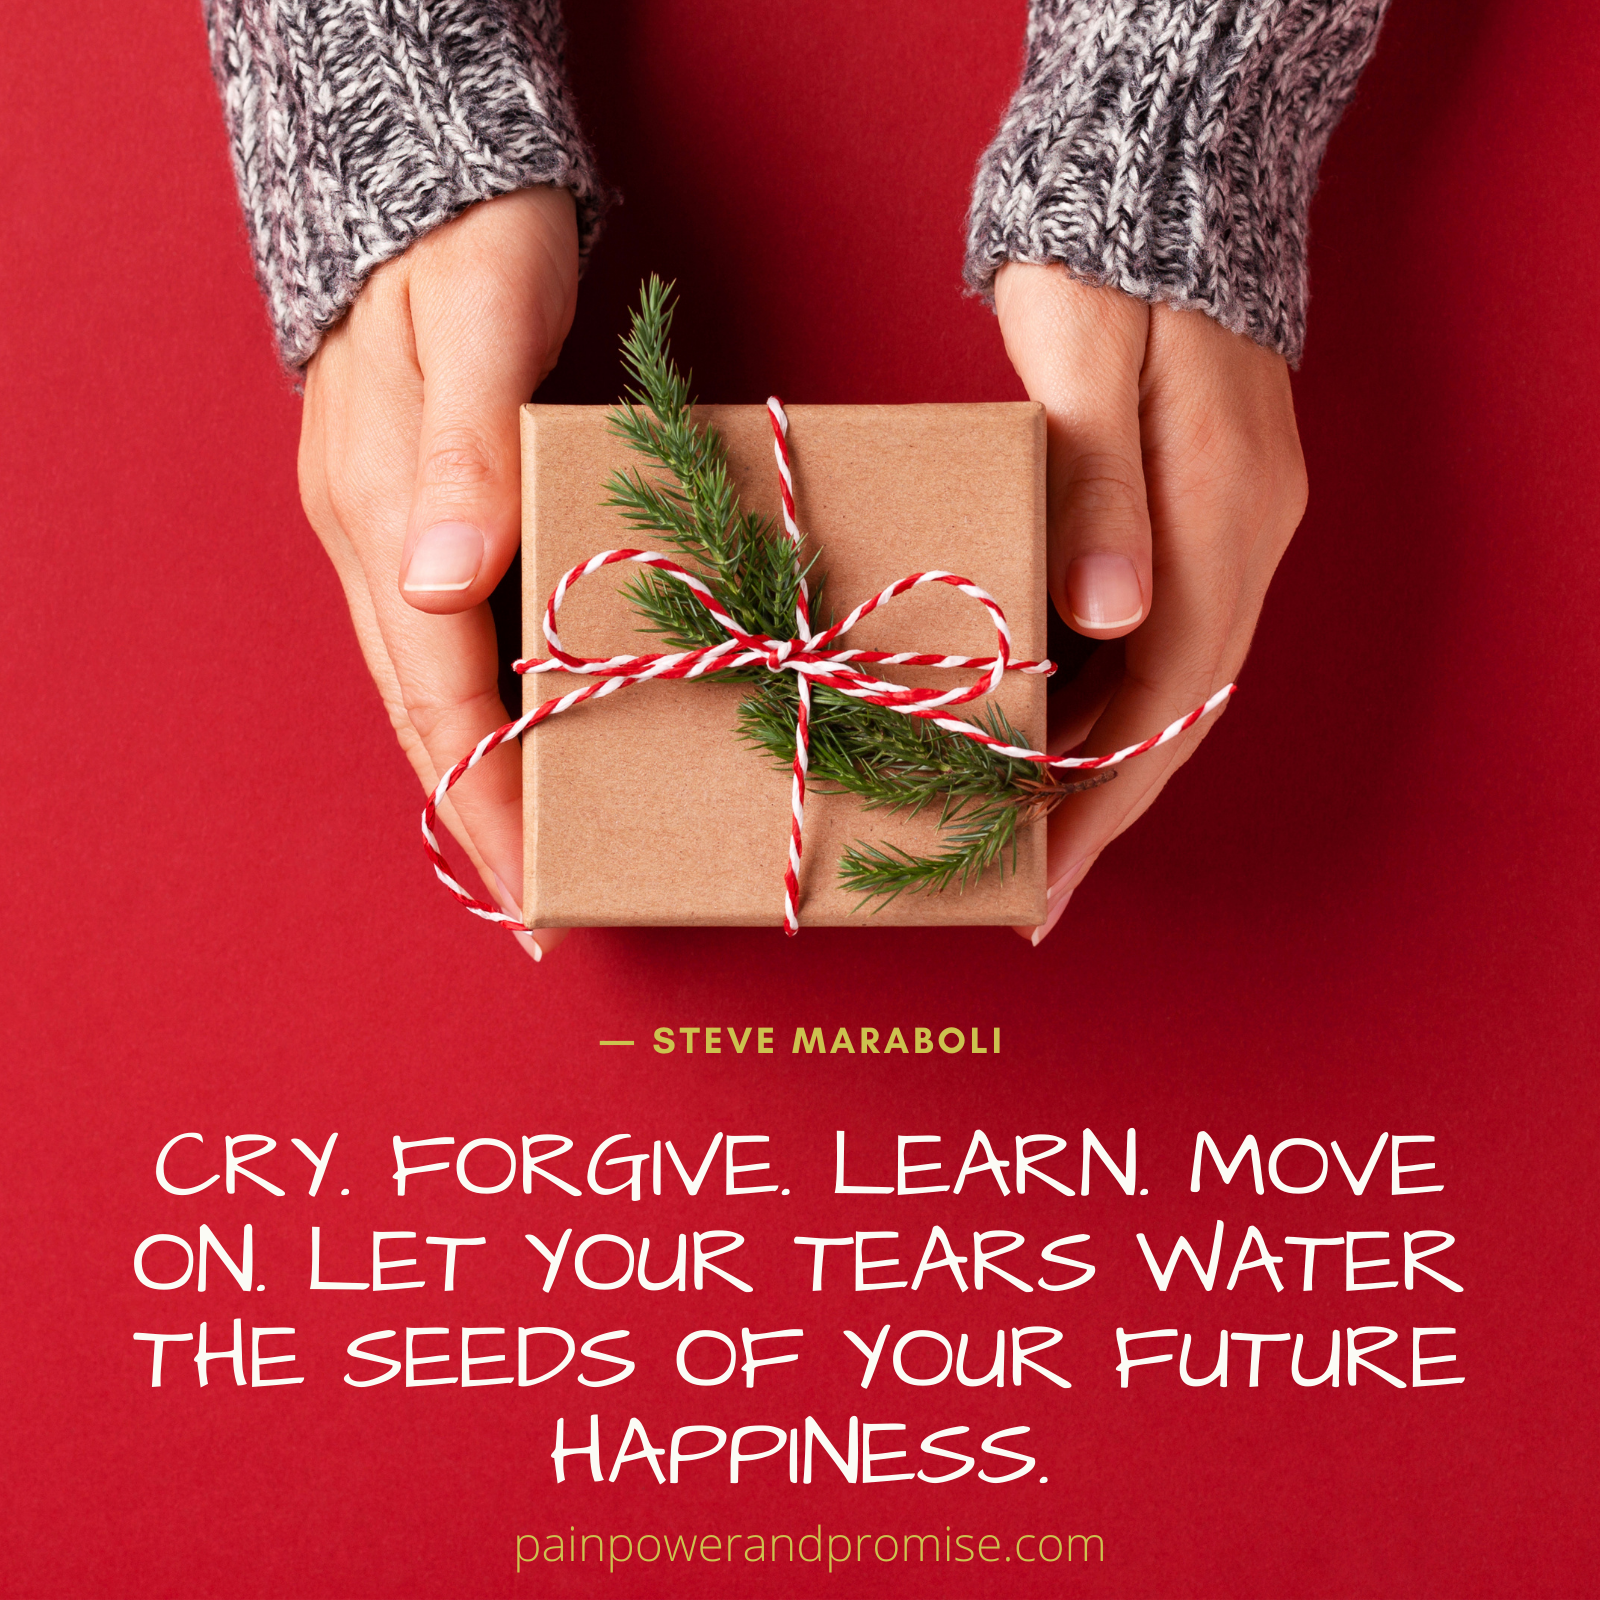 Cry. Forgive. Learn. Move on. Let your tears water the seeds of your future happiness.